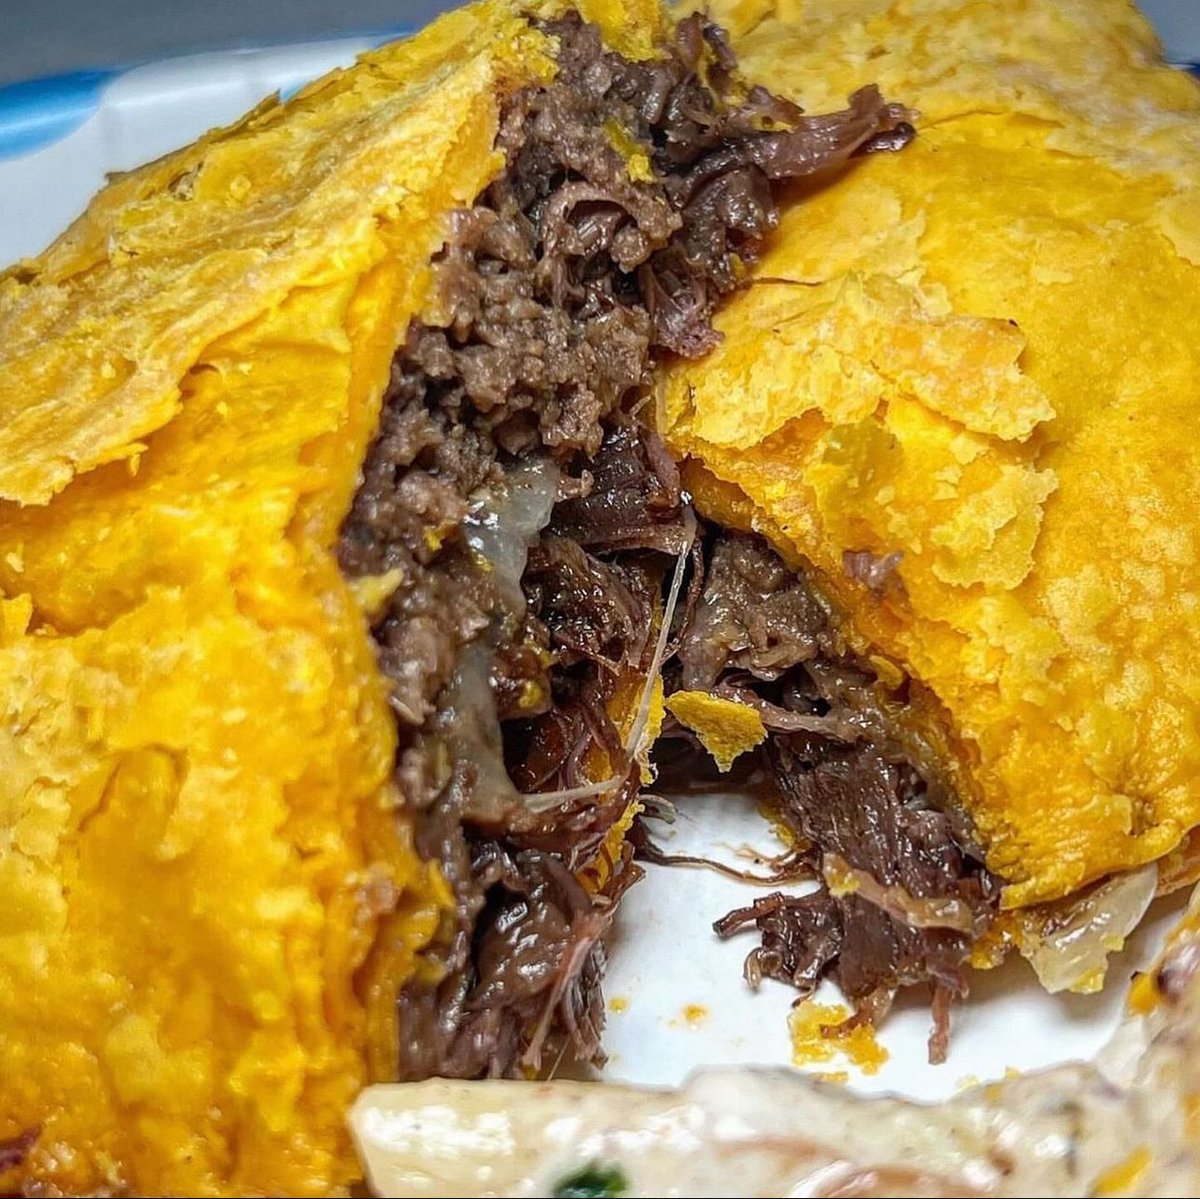 A Jamaican Oxtail Patty